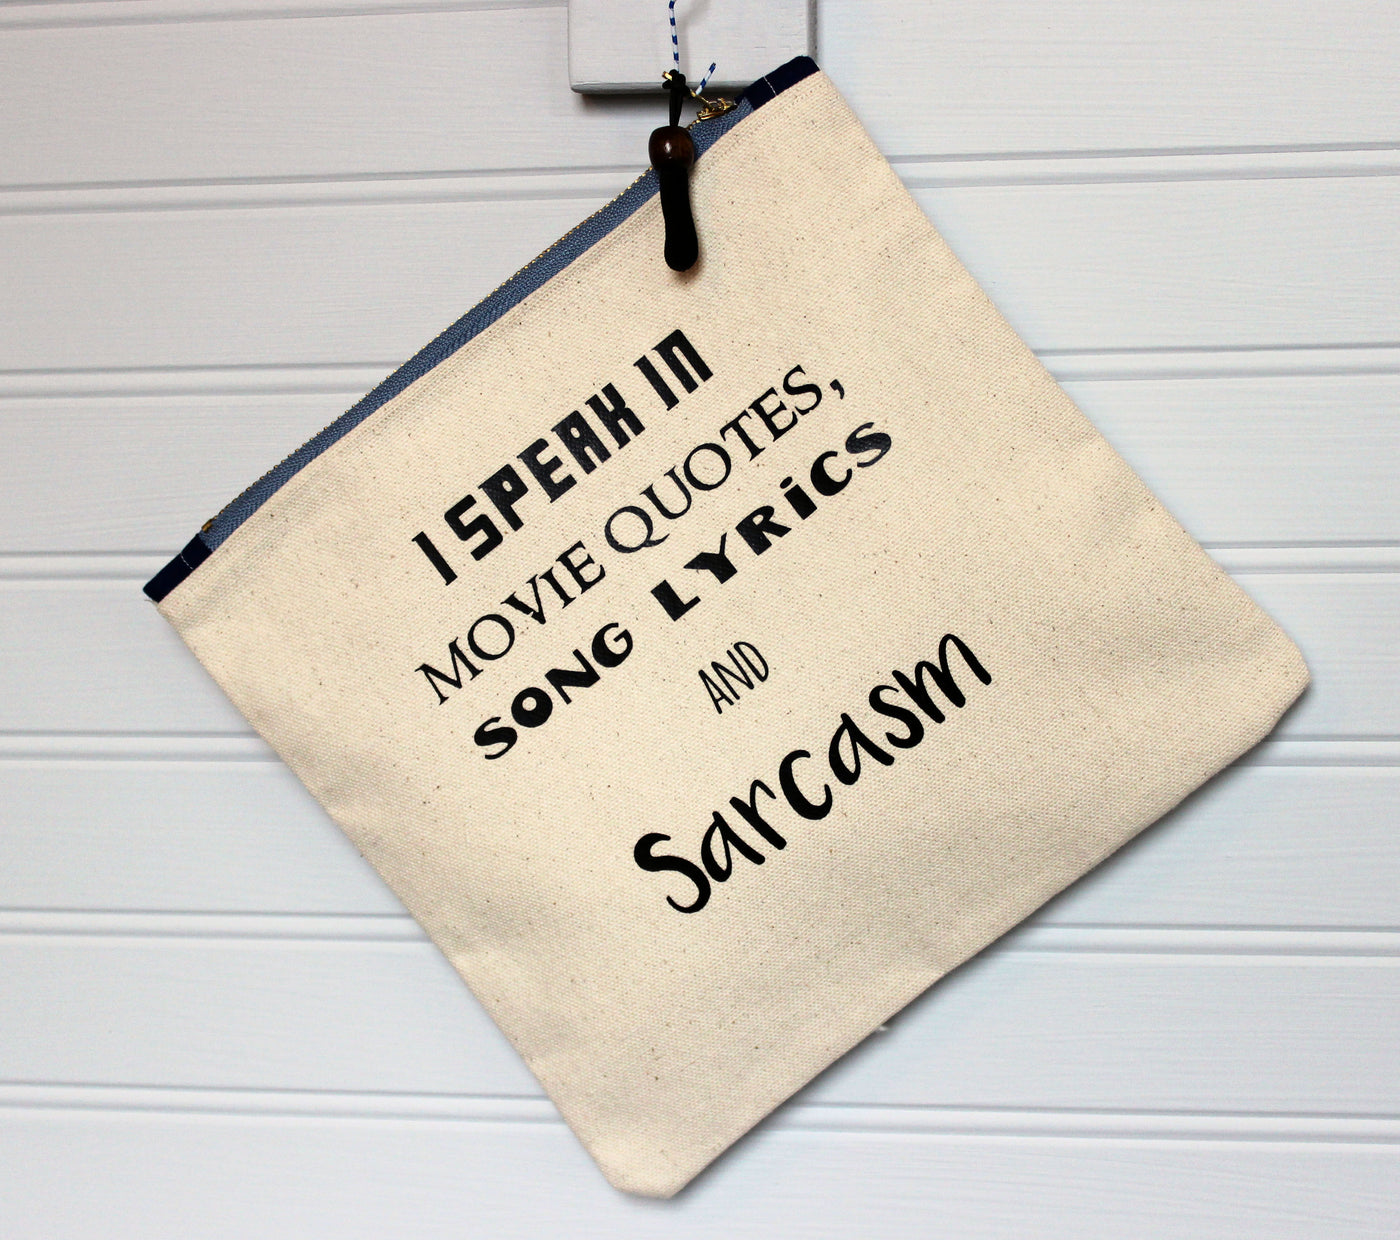 sarcasm and movie quotes - zip money makeup bag - Pretty Clever Words